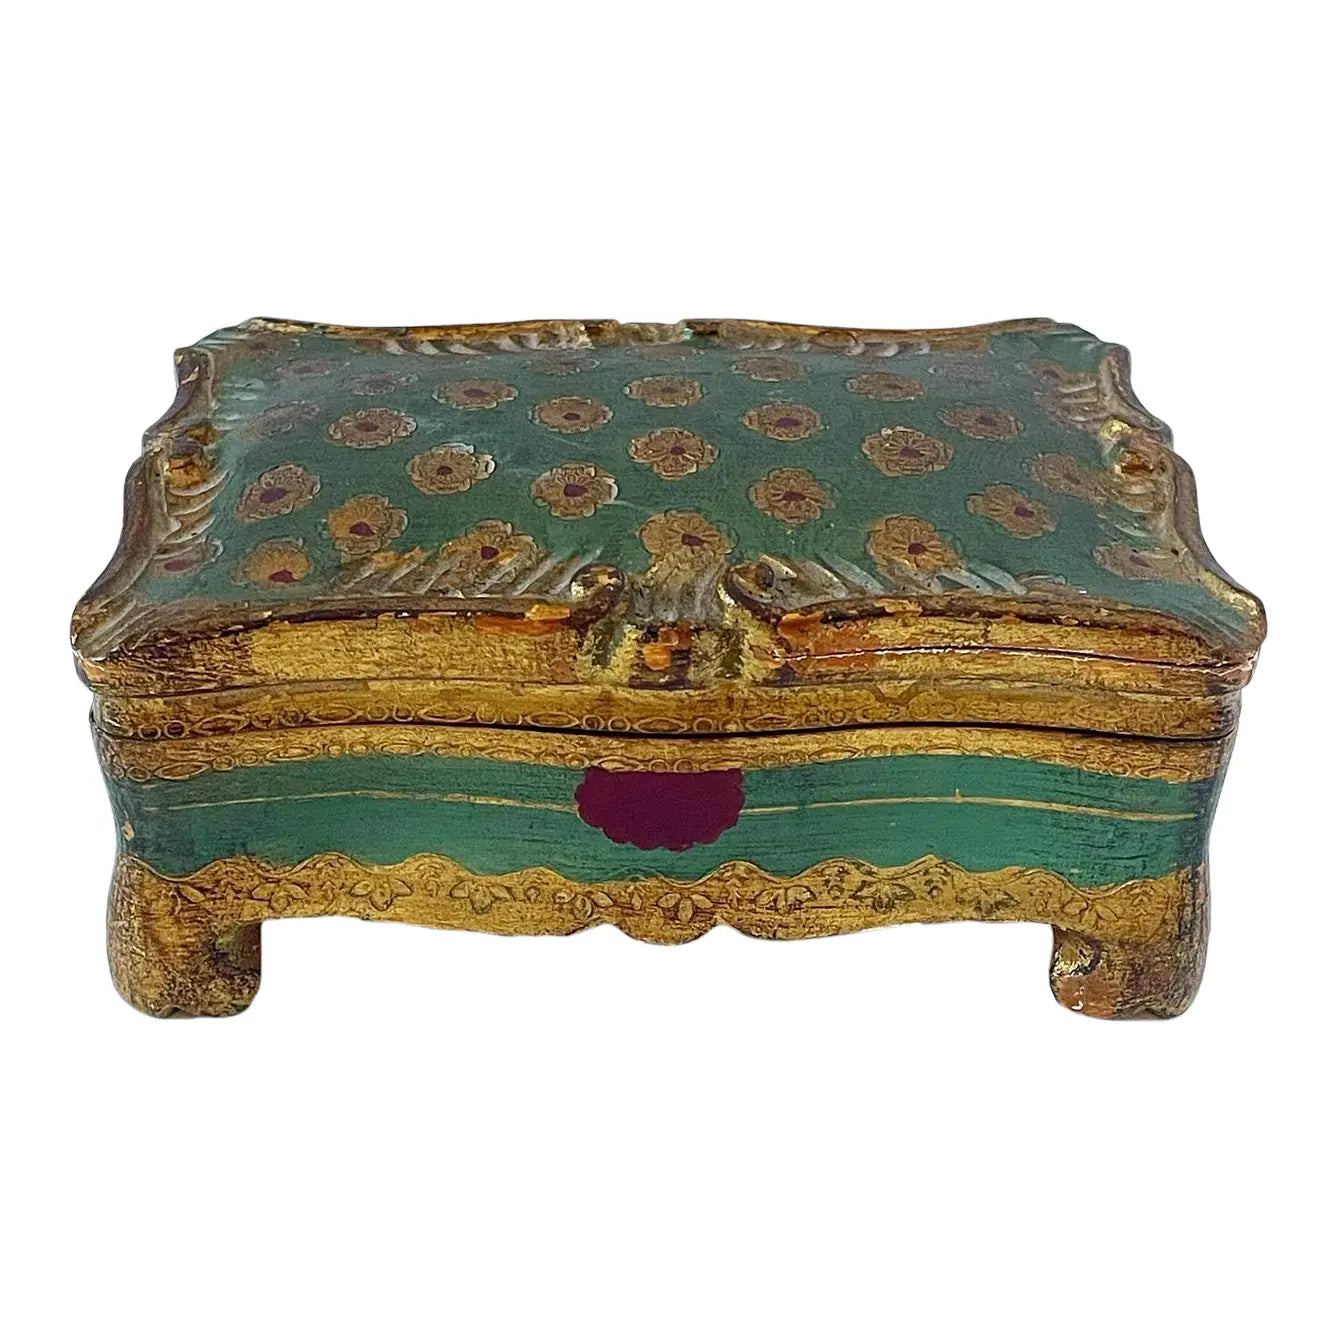 Vintage Mid-Century Green and Gold Carved and Painted Florentine Box